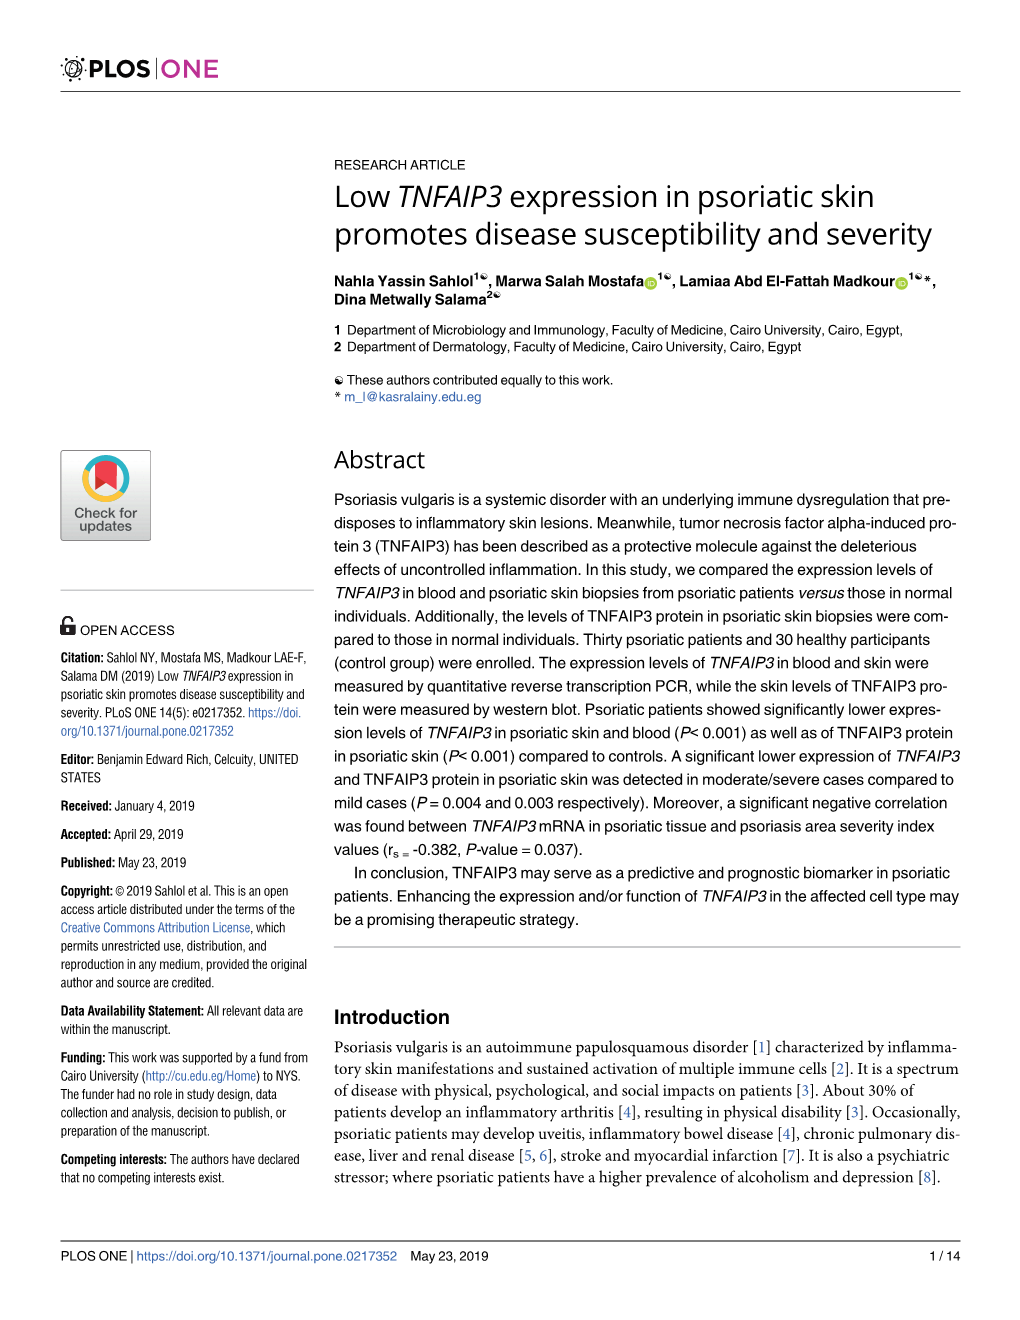 Low TNFAIP3 Expression in Psoriatic Skin Promotes Disease Susceptibility and Severity